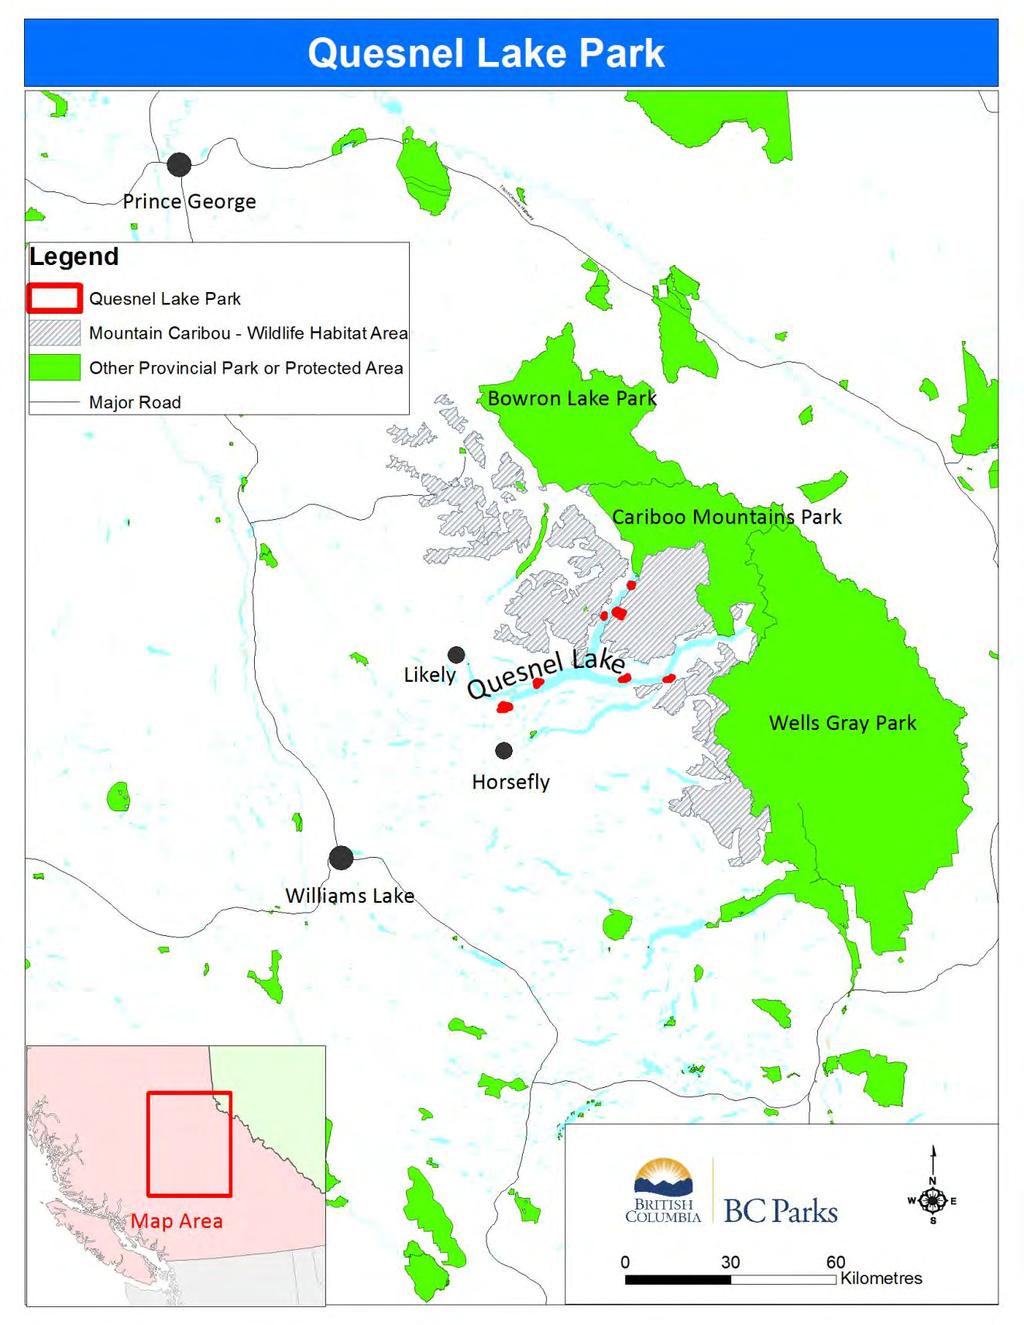 Figure 1: Context Map for Quesnel Lake